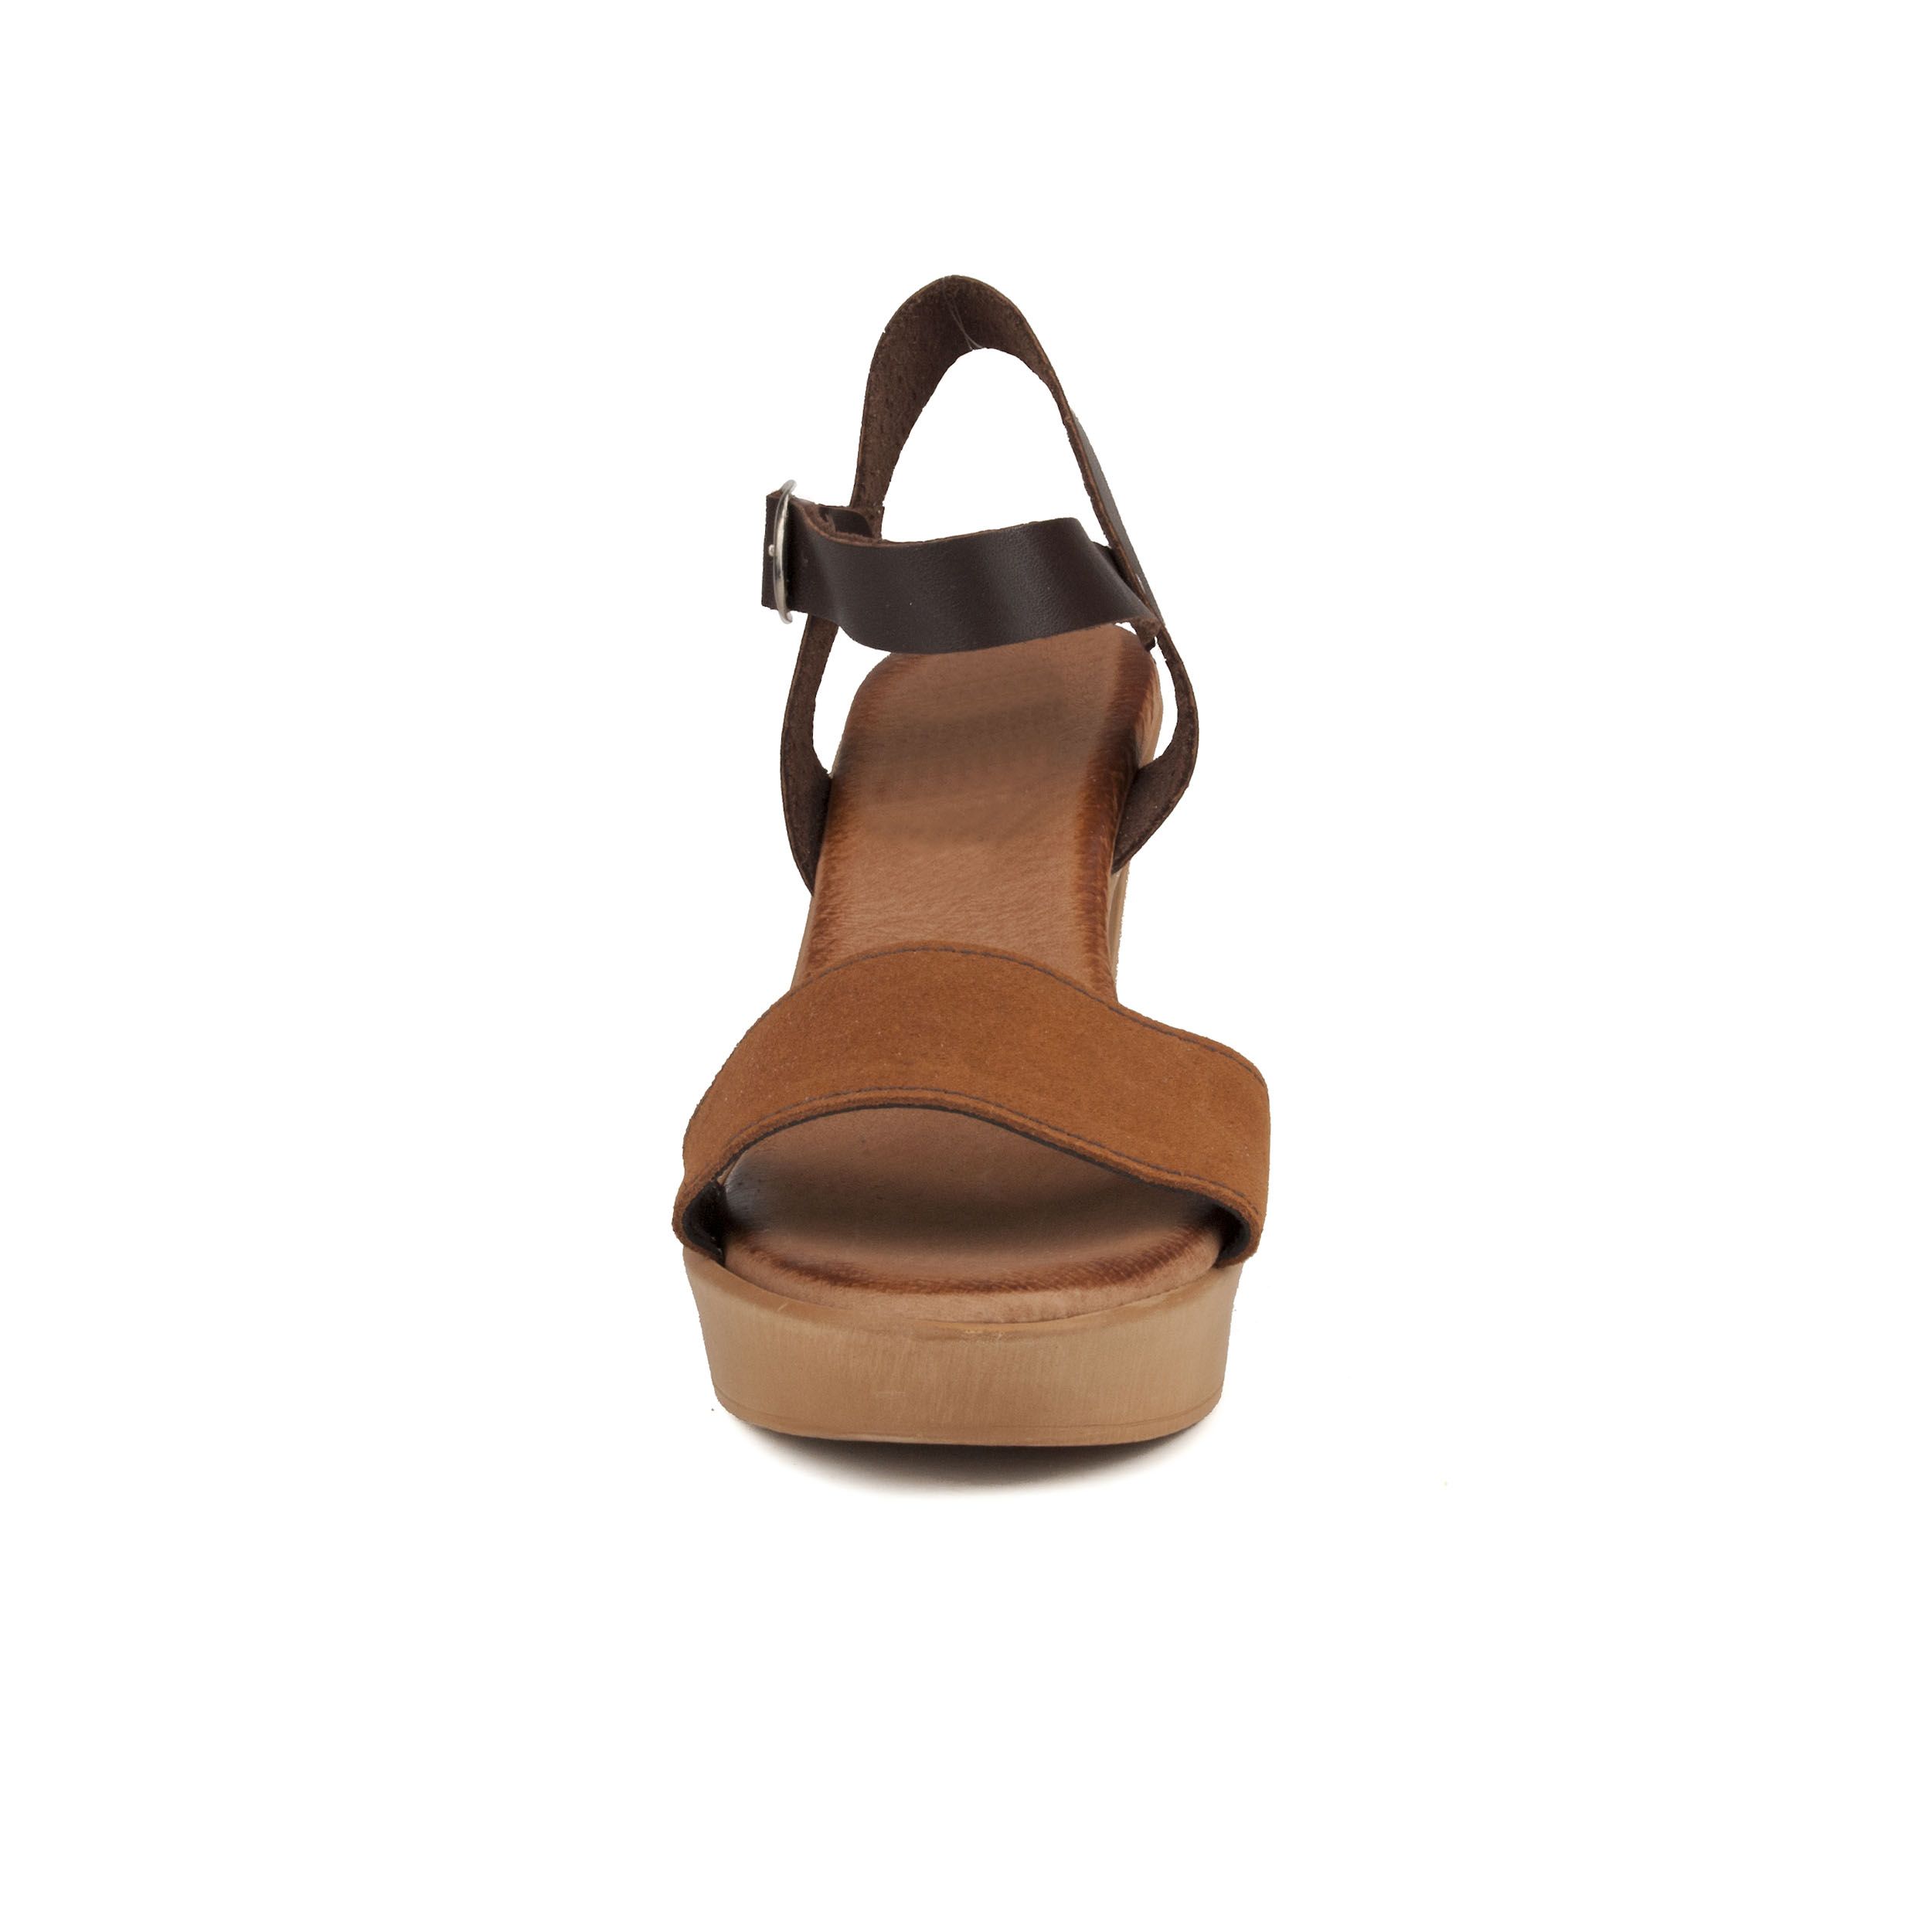 Despite its simplicity you will see how this sandal made of skin is extremely comfortable thanks to its padded gel plant and the polyurethane floor, which makes the star sandal because it does not weigh nothing, it is super light. Walking with these sandals will be very comfortable. Sandal with ankle closure. Style and elegant.